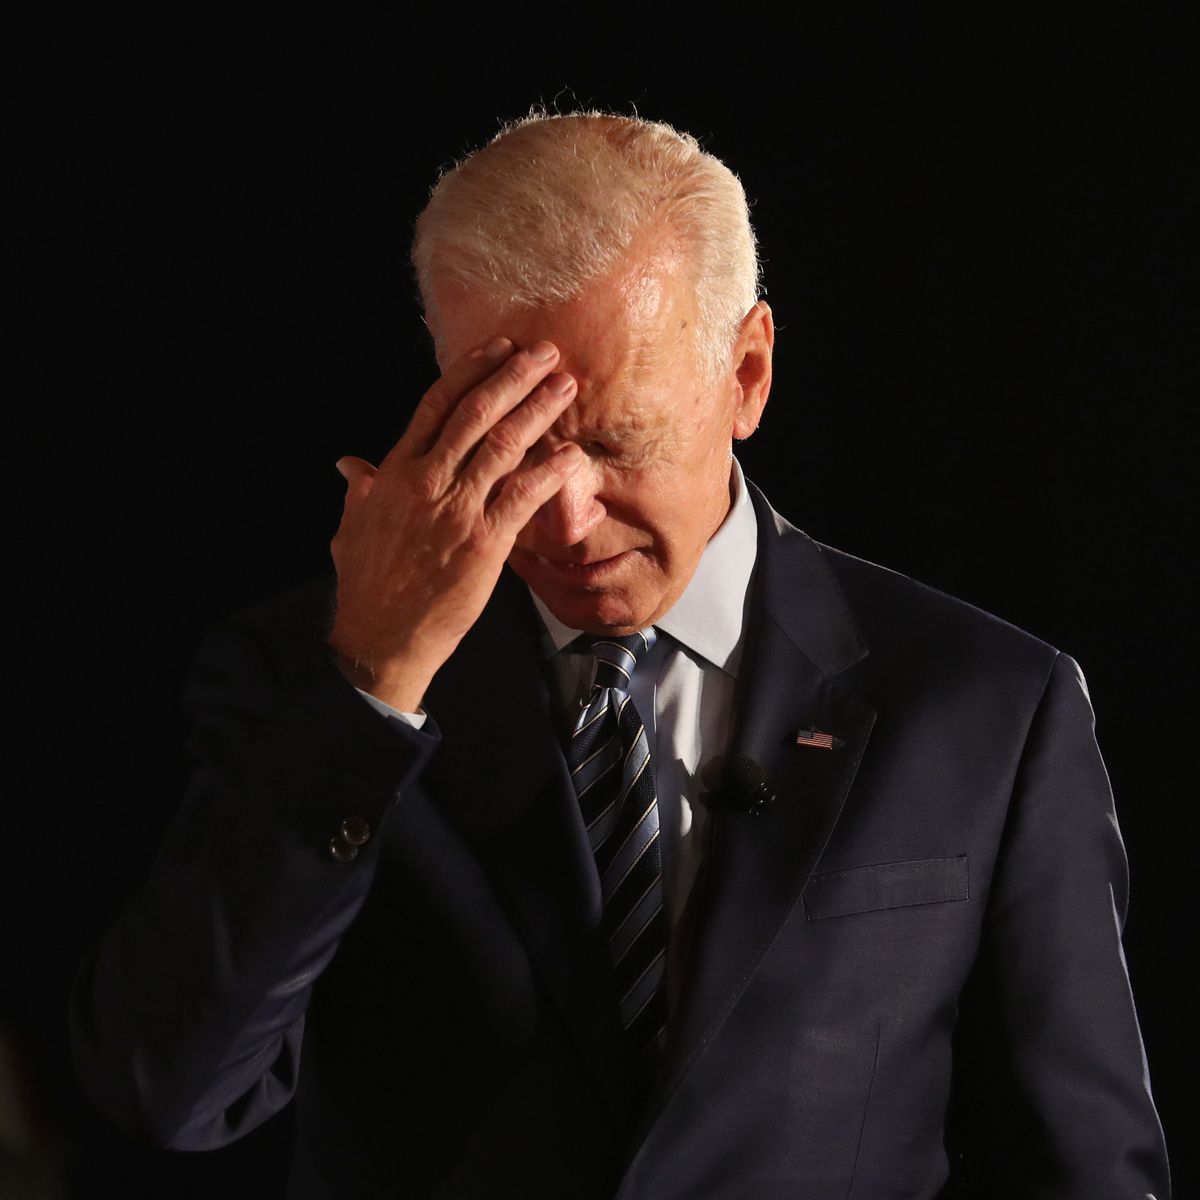 how much did joe biden get paid a month - Biden|President|Joe|Years|Trump|Delaware|Vice|Time|Obama|Senate|States|Law|Age|Campaign|Election|Administration|Family|House|Senator|Office|School|Wife|People|Hunter|University|Act|State|Year|Life|Party|Committee|Children|Beau|Daughter|War|Jill|Day|Facts|Americans|Presidency|Joe Biden|United States|Vice President|White House|Law School|President Trump|Foreign Relations Committee|Donald Trump|President Biden|Presidential Campaign|Presidential Election|Democratic Party|Syracuse University|United Nations|Net Worth|Barack Obama|Judiciary Committee|Neilia Hunter|U.S. Senate|Hillary Clinton|New York Times|Obama Administration|Empty Store Shelves|Systemic Racism|Castle County Council|Archmere Academy|U.S. Senator|Vice Presidency|Second Term|Biden Administration